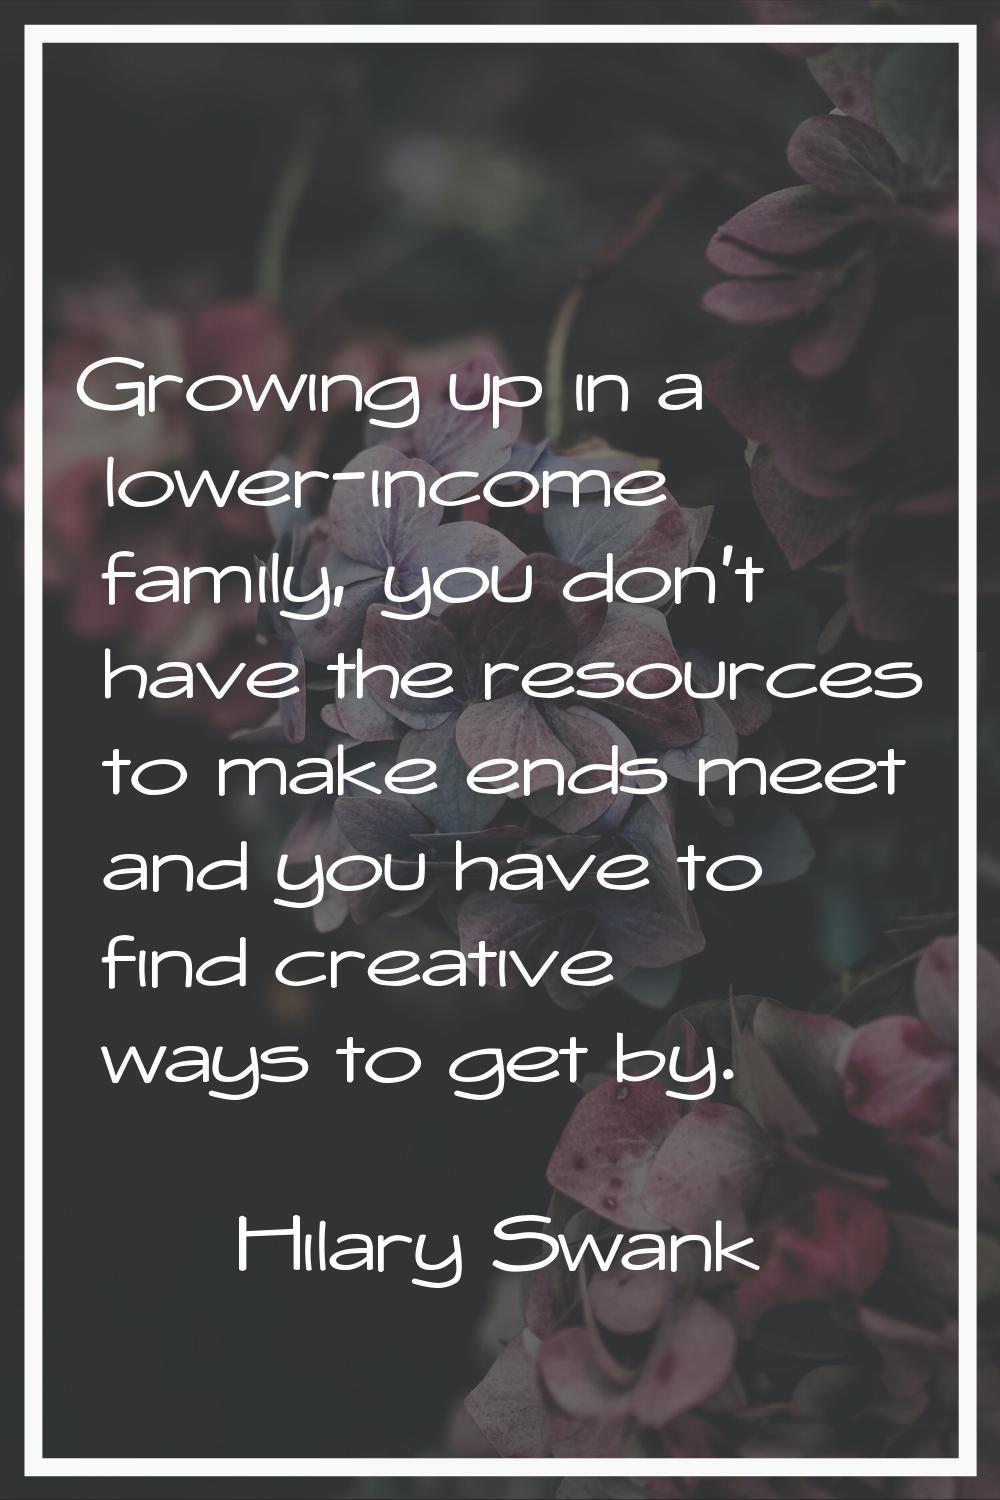 Growing up in a lower-income family, you don't have the resources to make ends meet and you have to